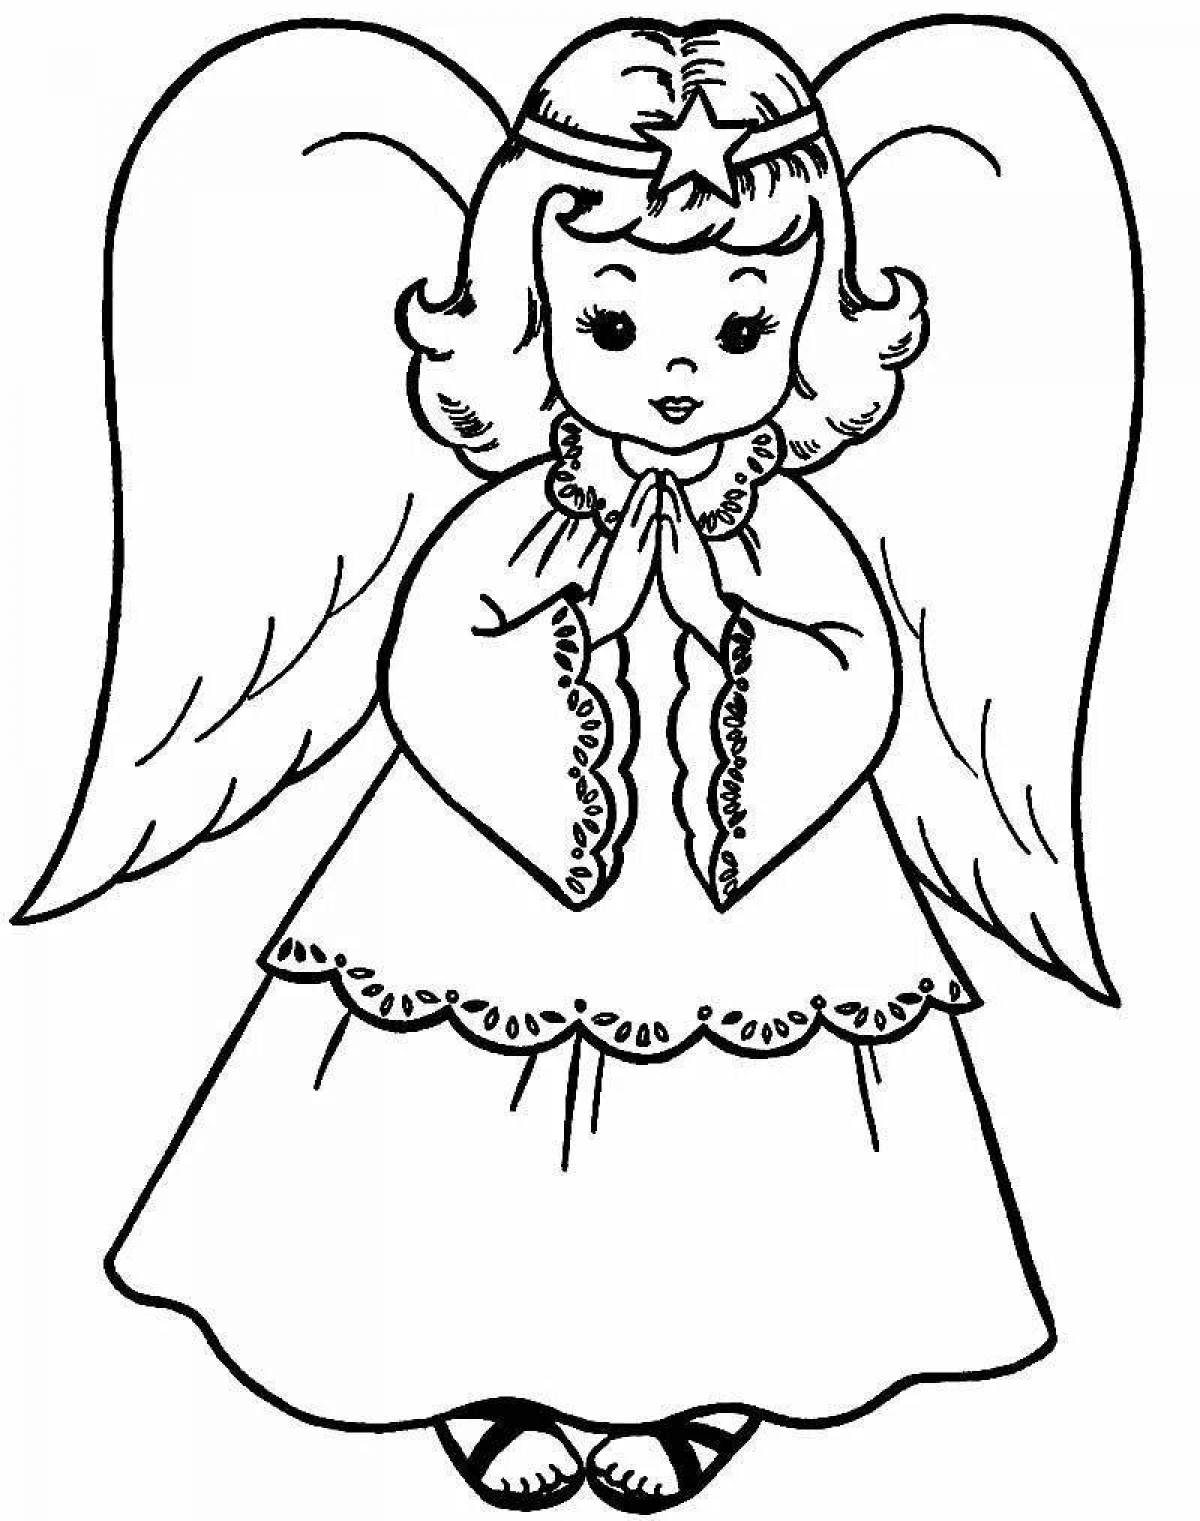 Angels with beautiful wings #1